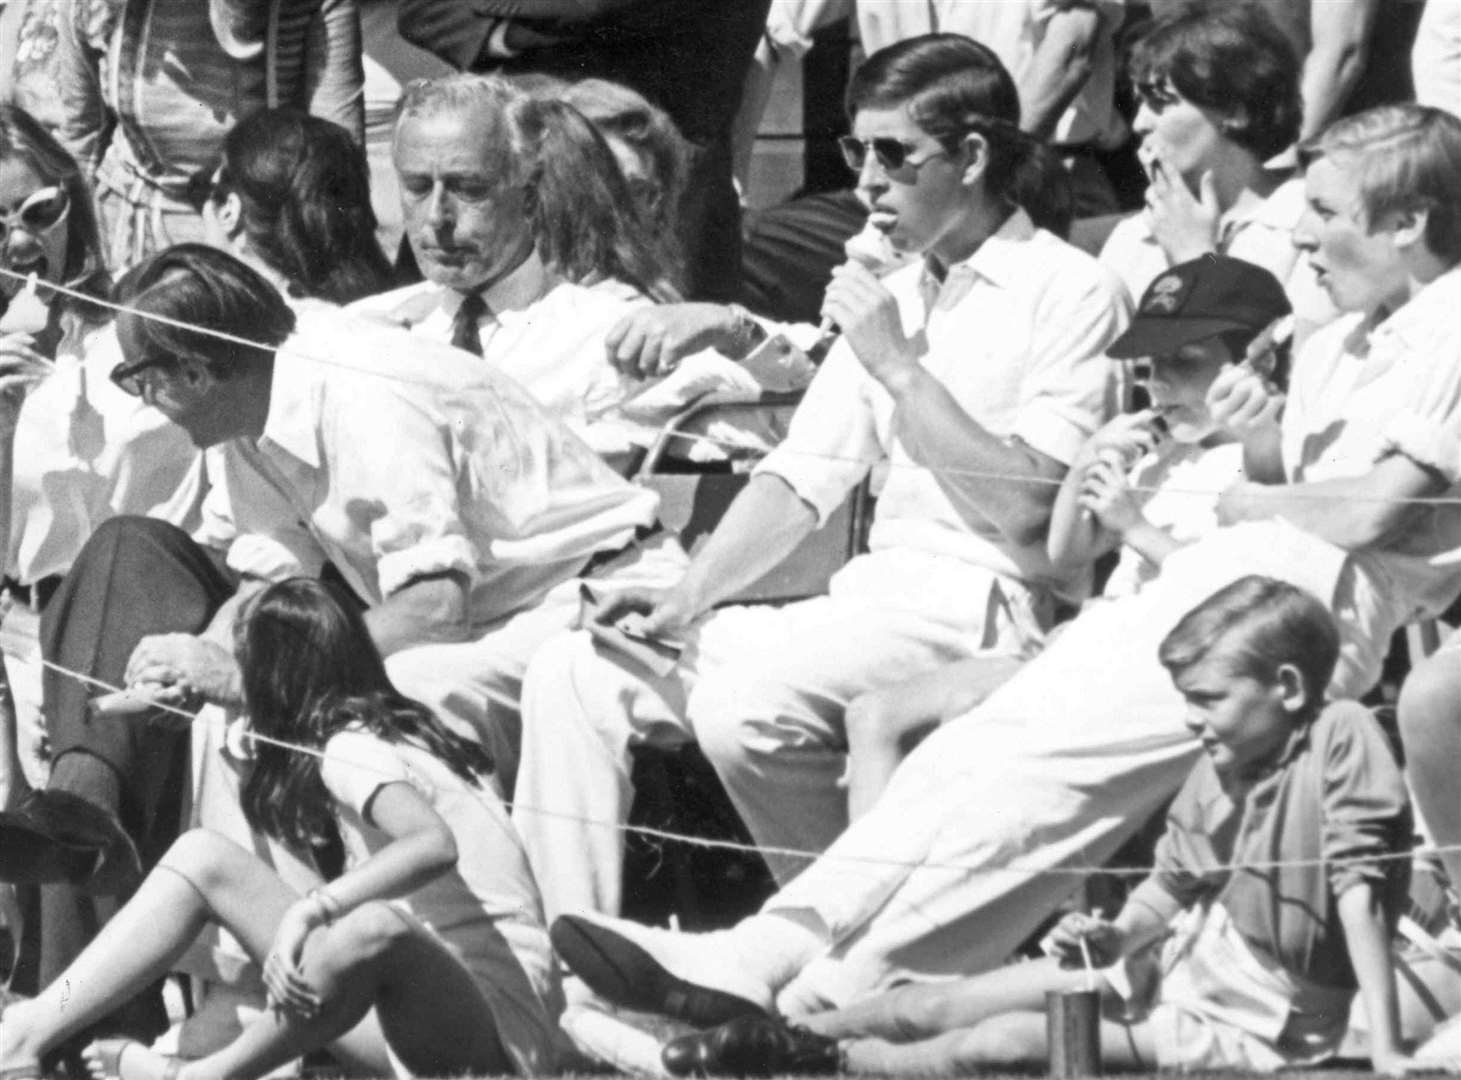 The Prince of Wales and Lord Mountbatten during a cricket match in Kent